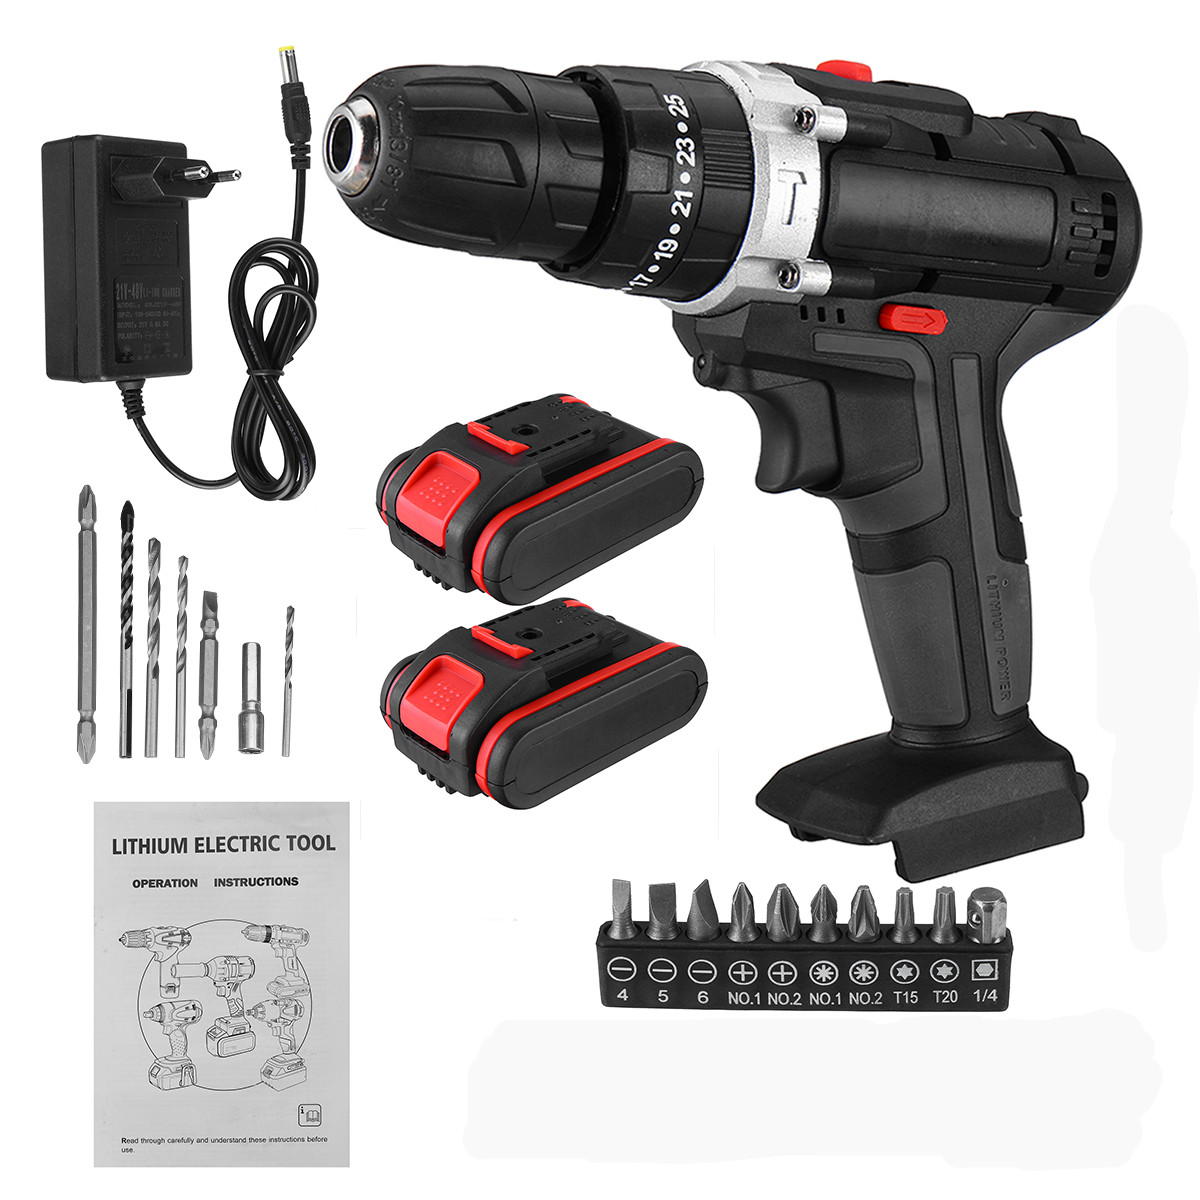 48V 3 in 1 Cordless Electric Drill Screwdriver 2 Speed 25+3 Turque Wireless Power Driver Tools Set with 2 x 6000MAH Battery